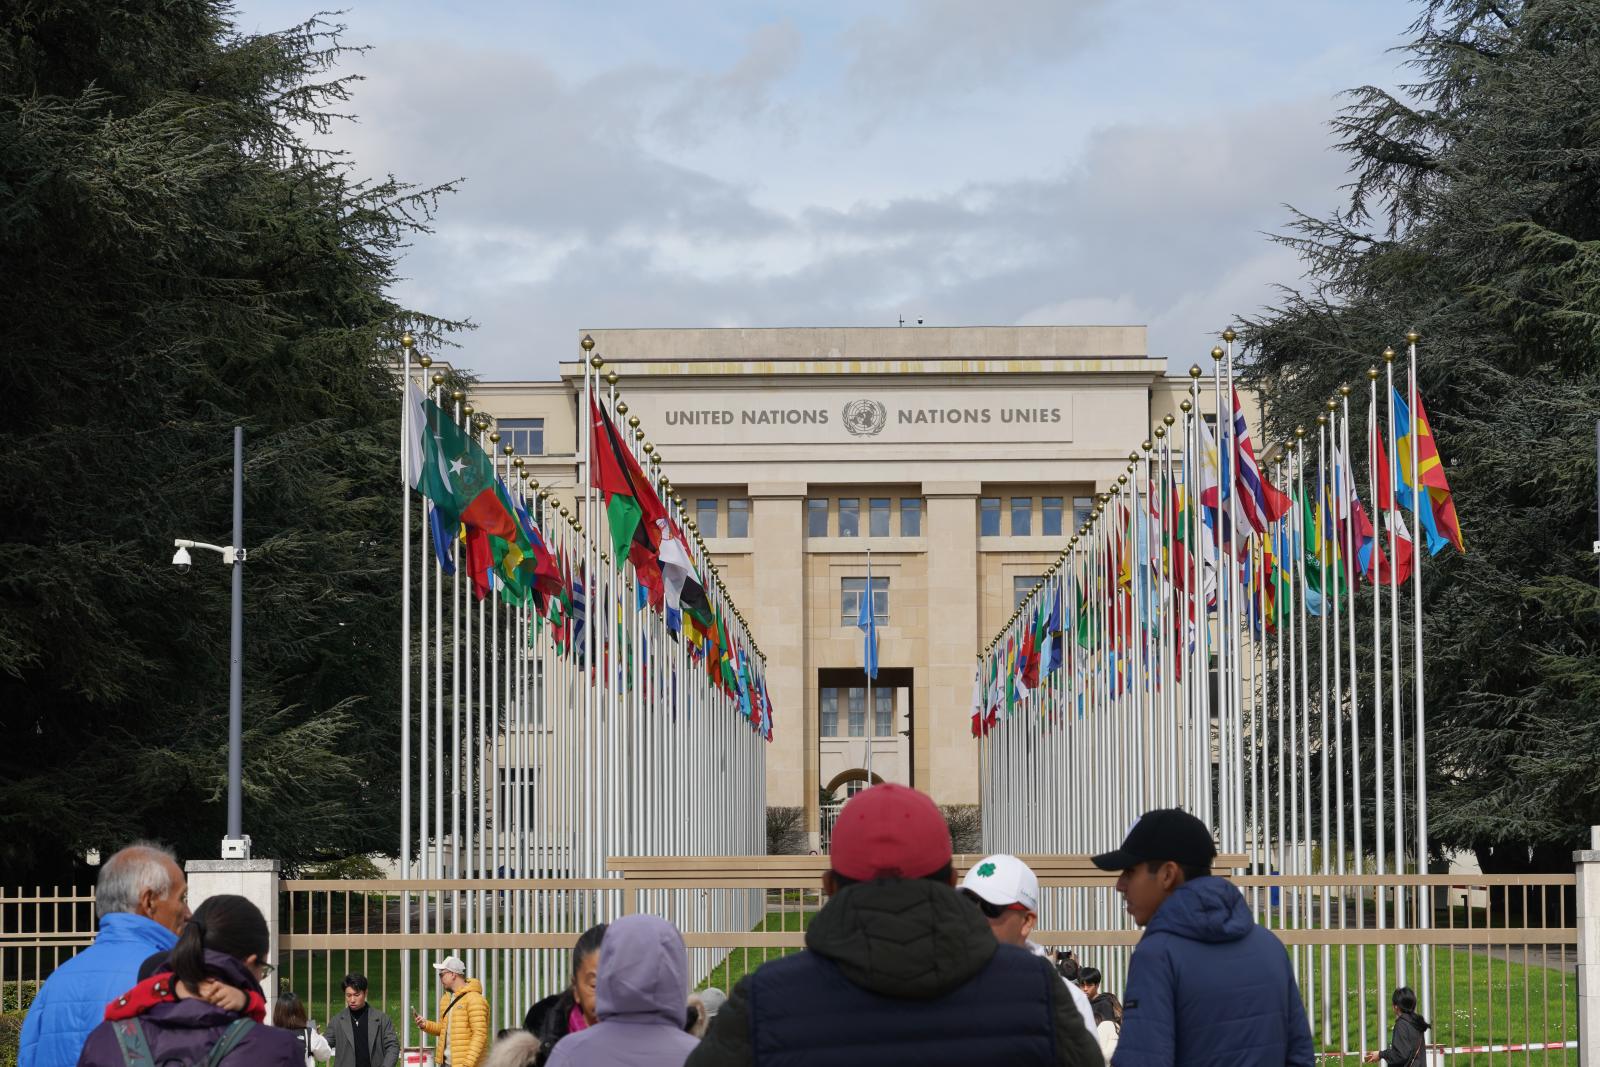 People at the United Nations Building in Geneva